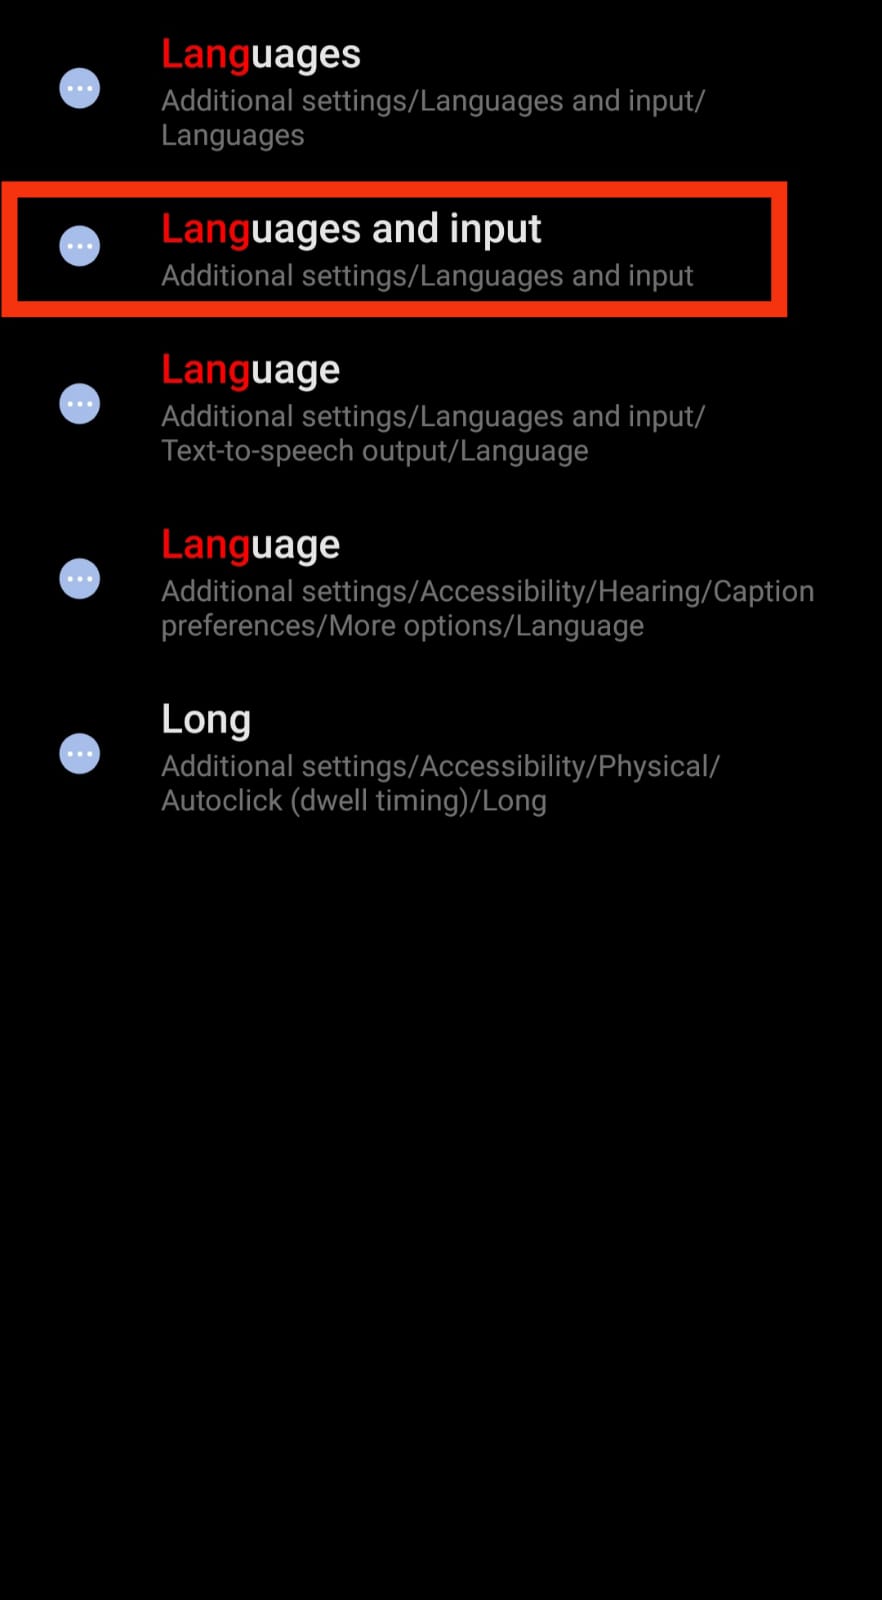 Tap on Languages and input.